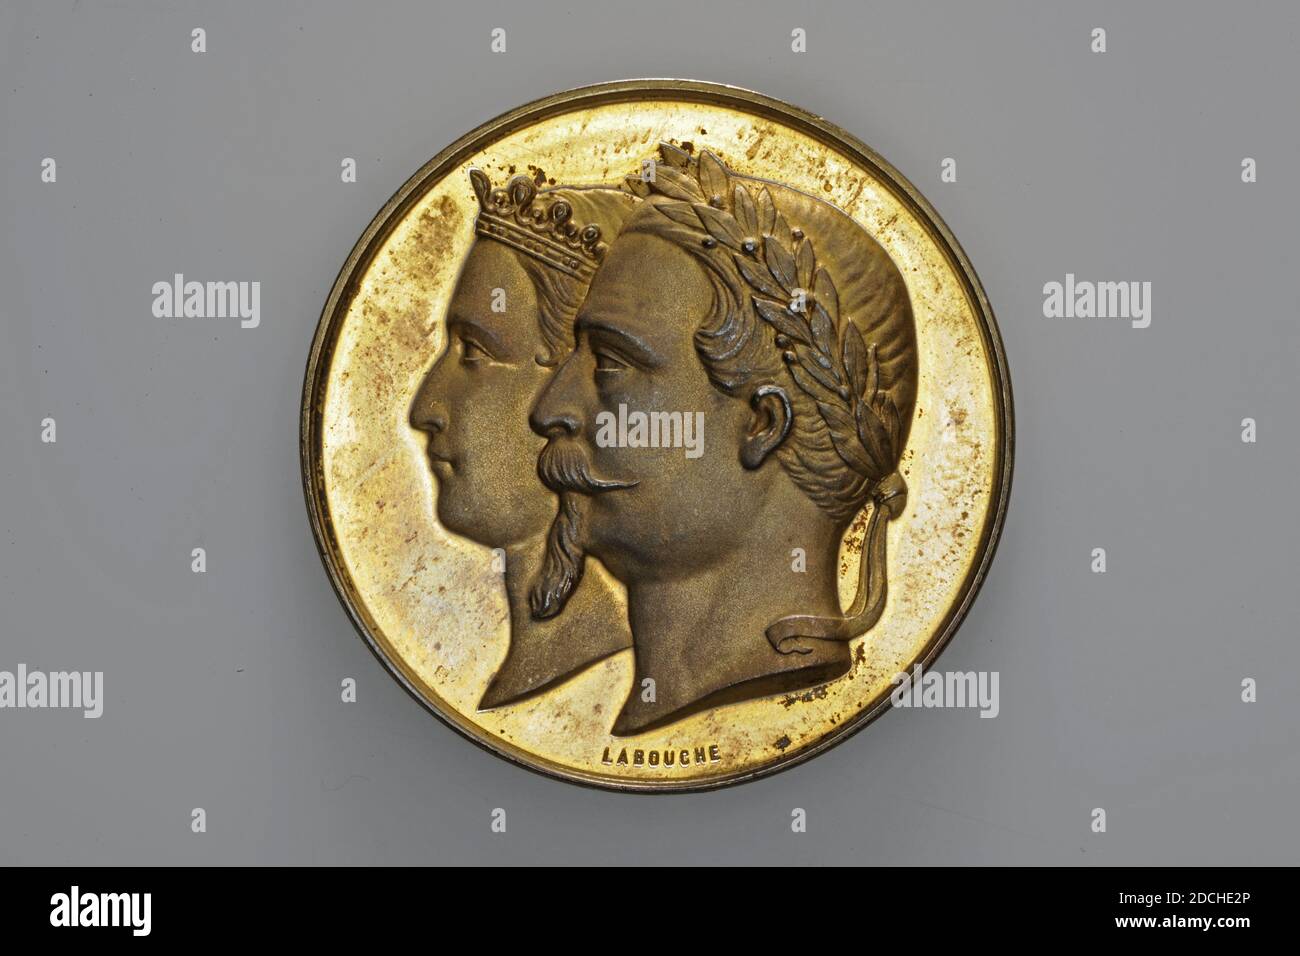 prize medal, Labouche, 1867, General: 5 x 0.3cm (50 x 3mm), Weight: 47.8g, double portrait, building, male, female, Gilded silver prize medal, minted for the Paris World's Fair, 1867. On the obverse the heads of a male figure and a female figure: Emperor Napoleon III and the Empress, both facing left, depicted one behind the other. Napoleon III wears a small beard and mustache and has a laurel wreath on his head. The empress is wearing a crown. Under the headings is LABOUCHE. On the reverse is the entrance to the exhibition, with flowing streamers. Human figures are depicted in front of the Stock Photo